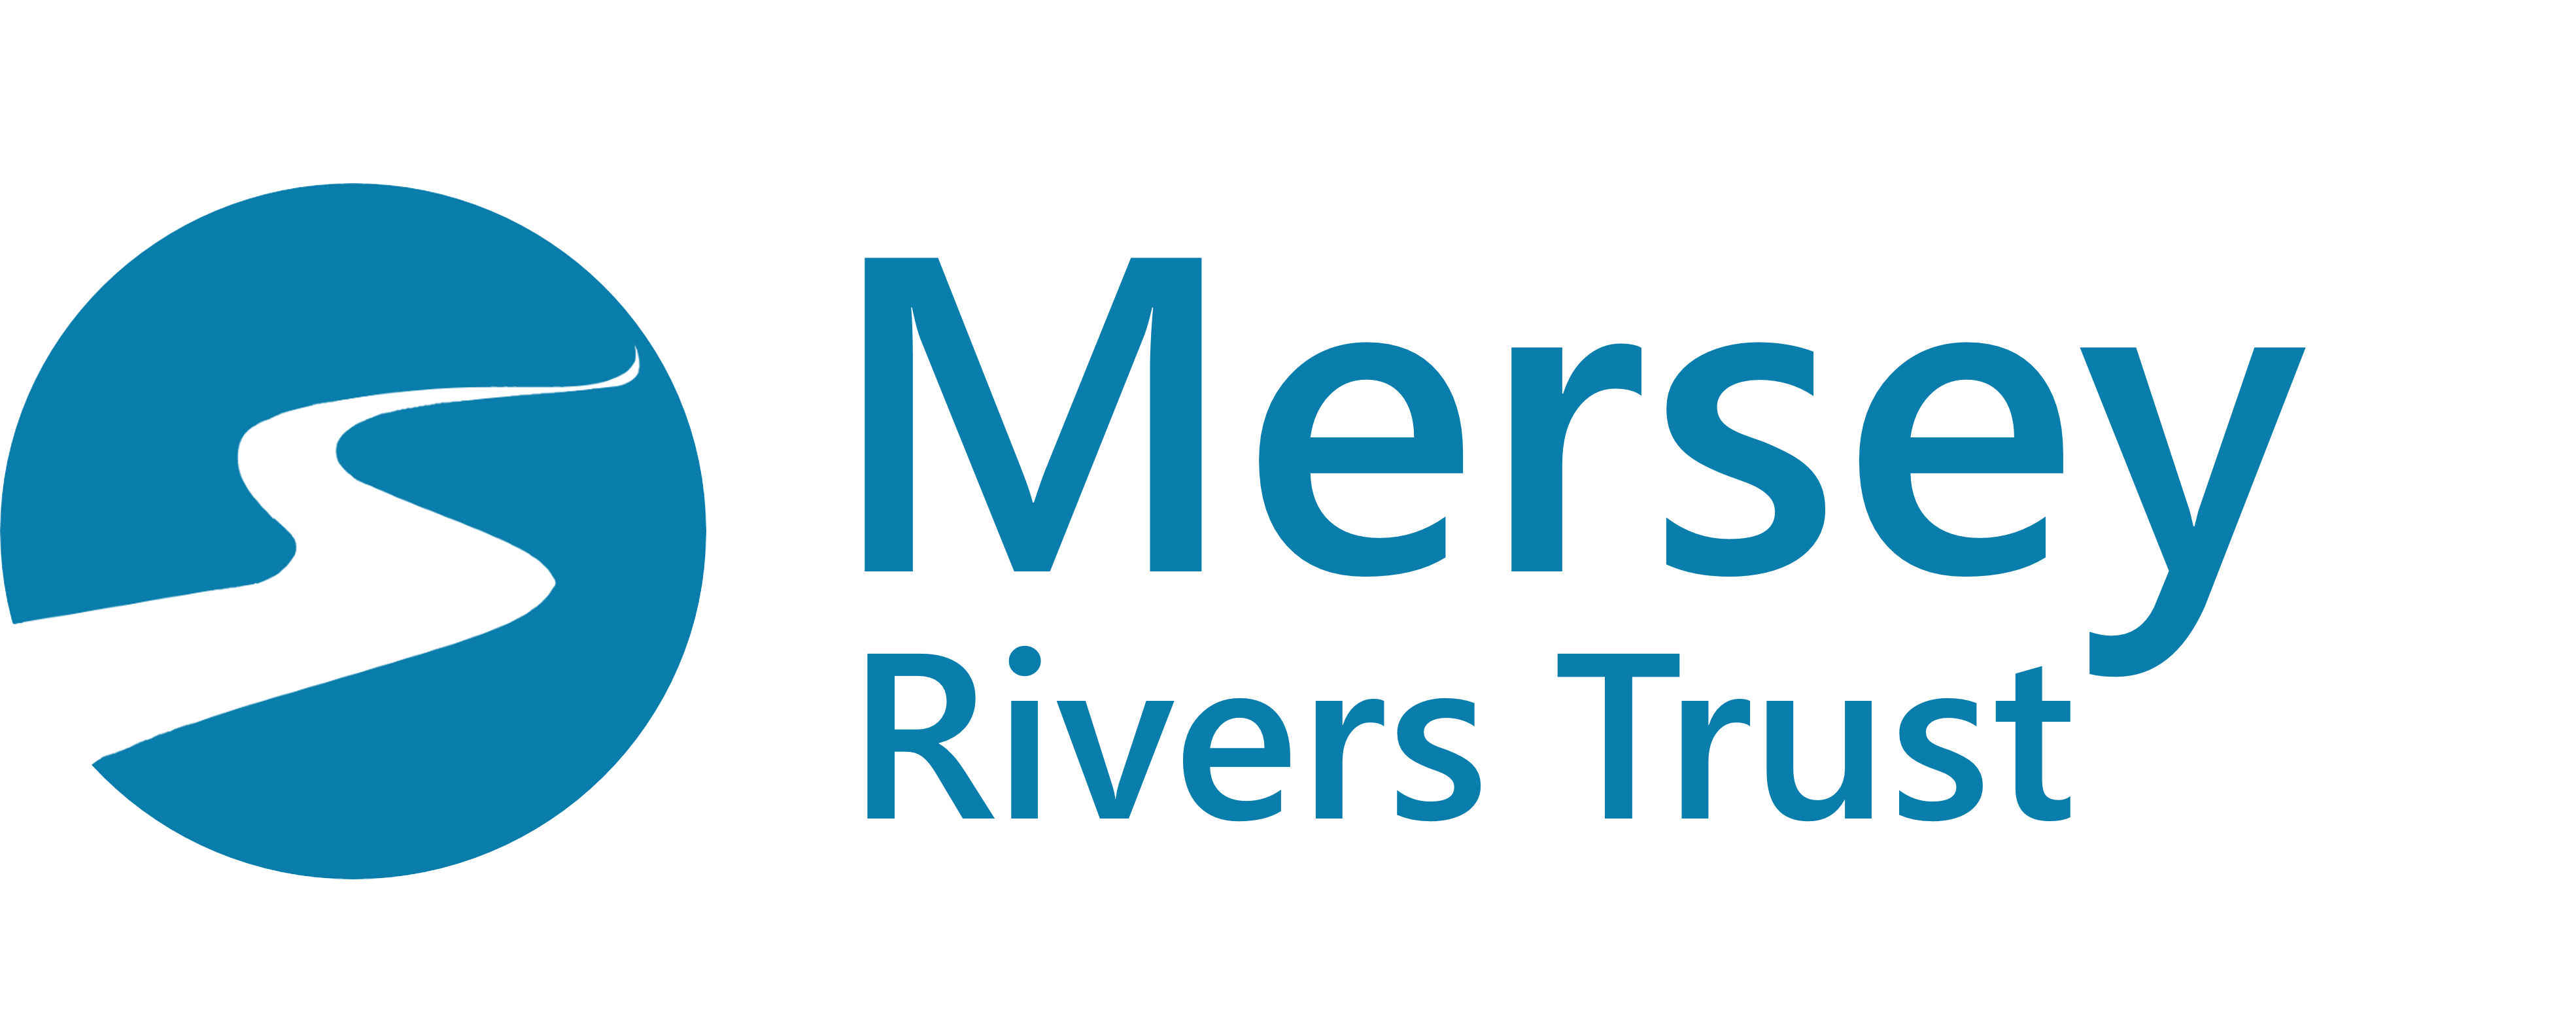 The Mersey Rivers Trust